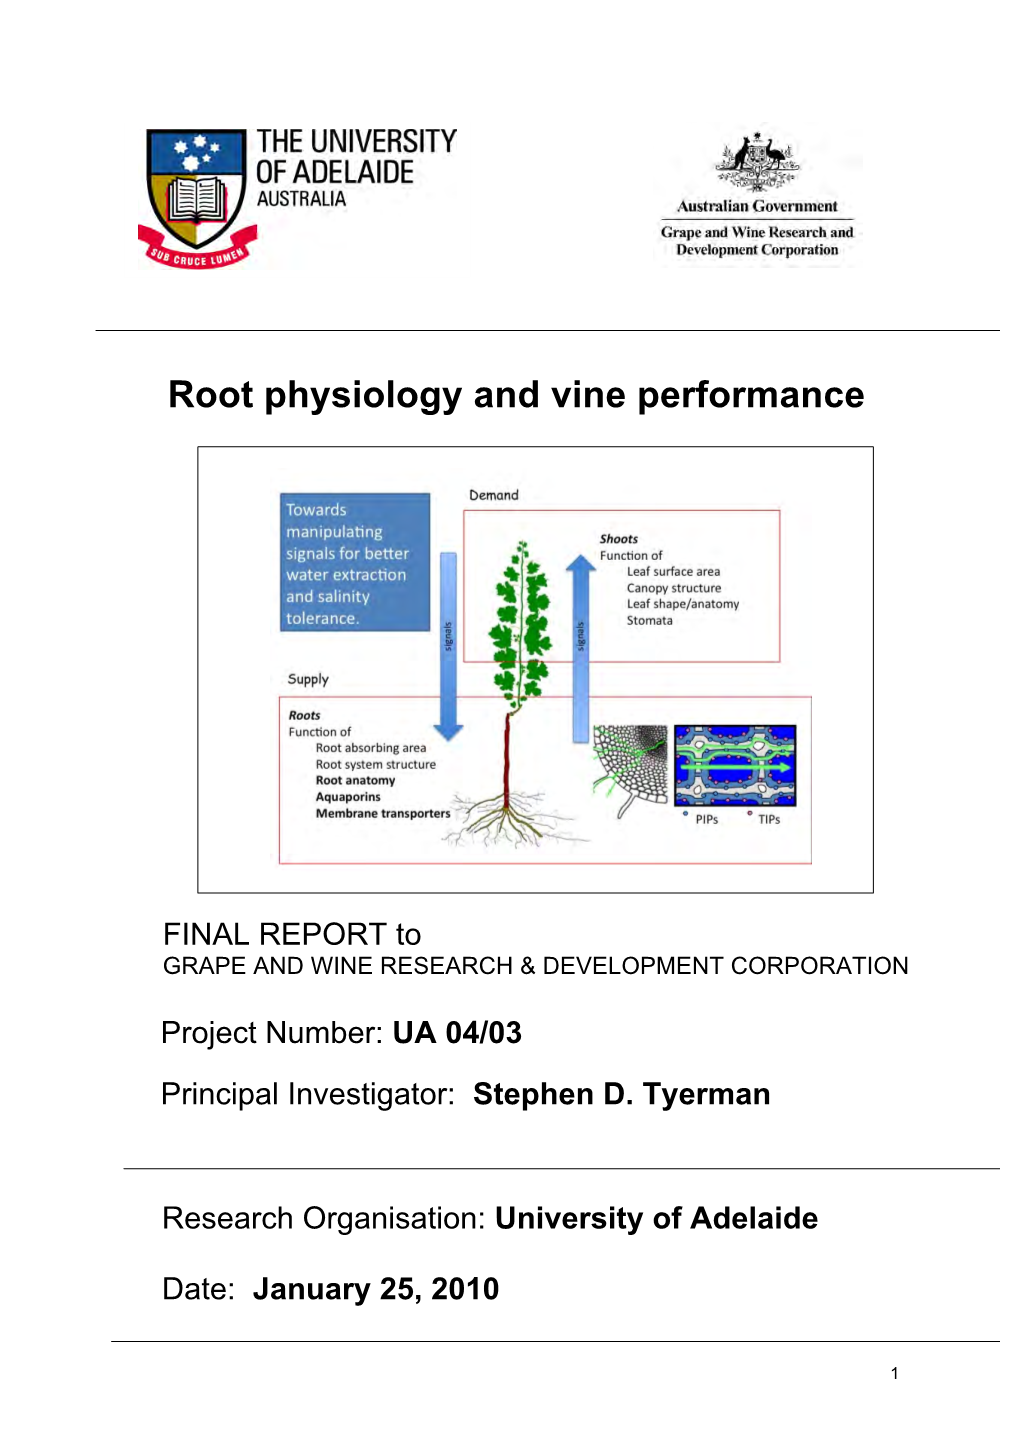 Root Physiology and Vine Performance